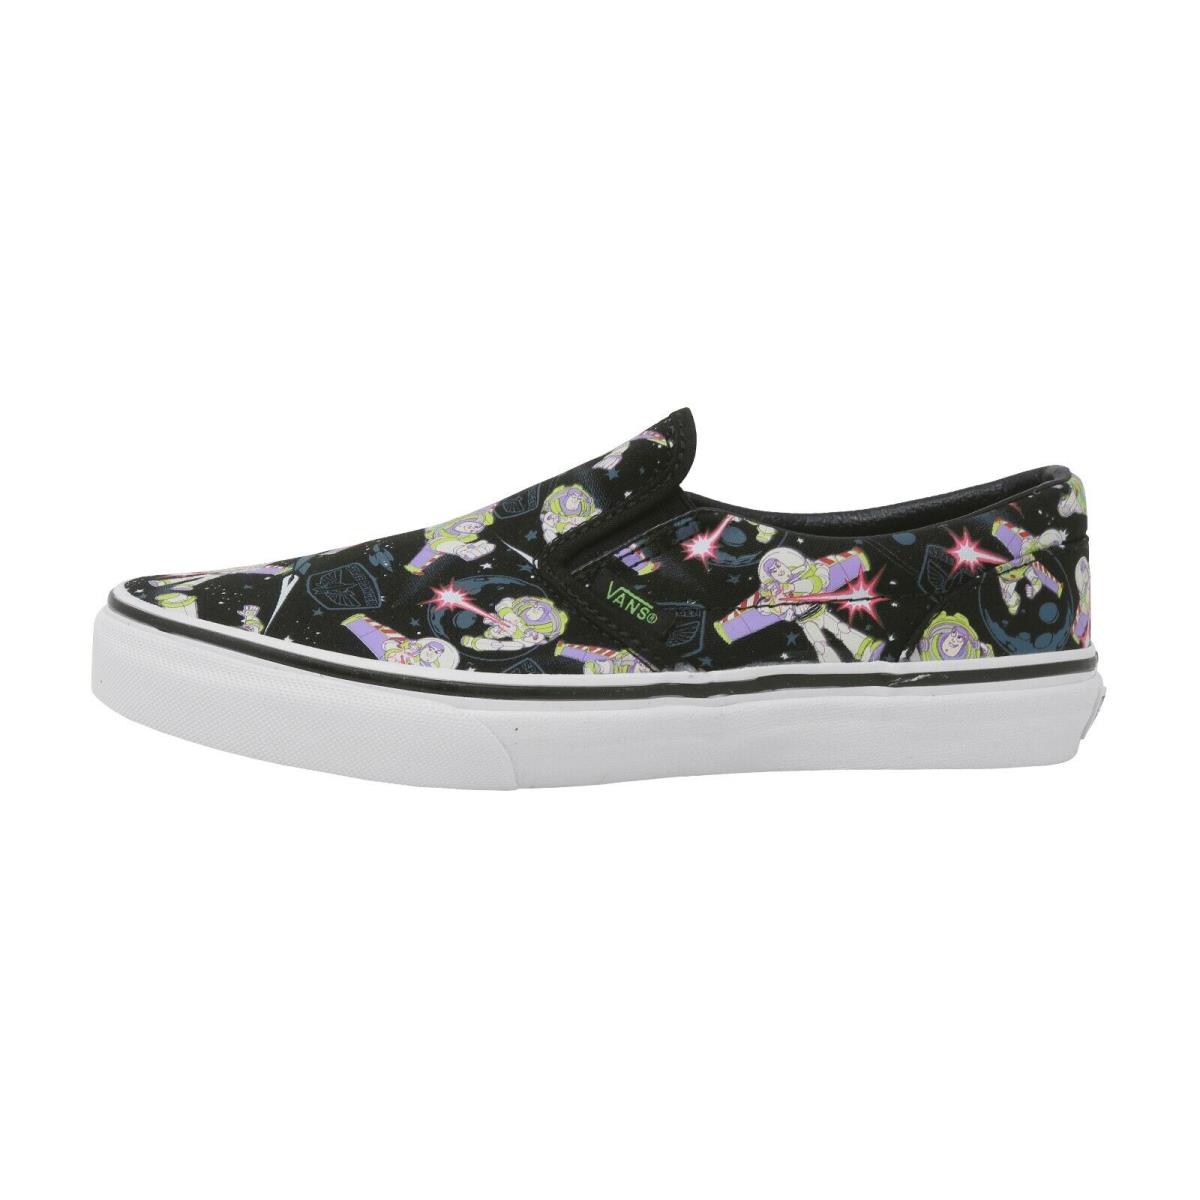 Vans Slip On Toy Story Buzz Light Year Big Kids Youths Boys Girls Shoes - Multicolor